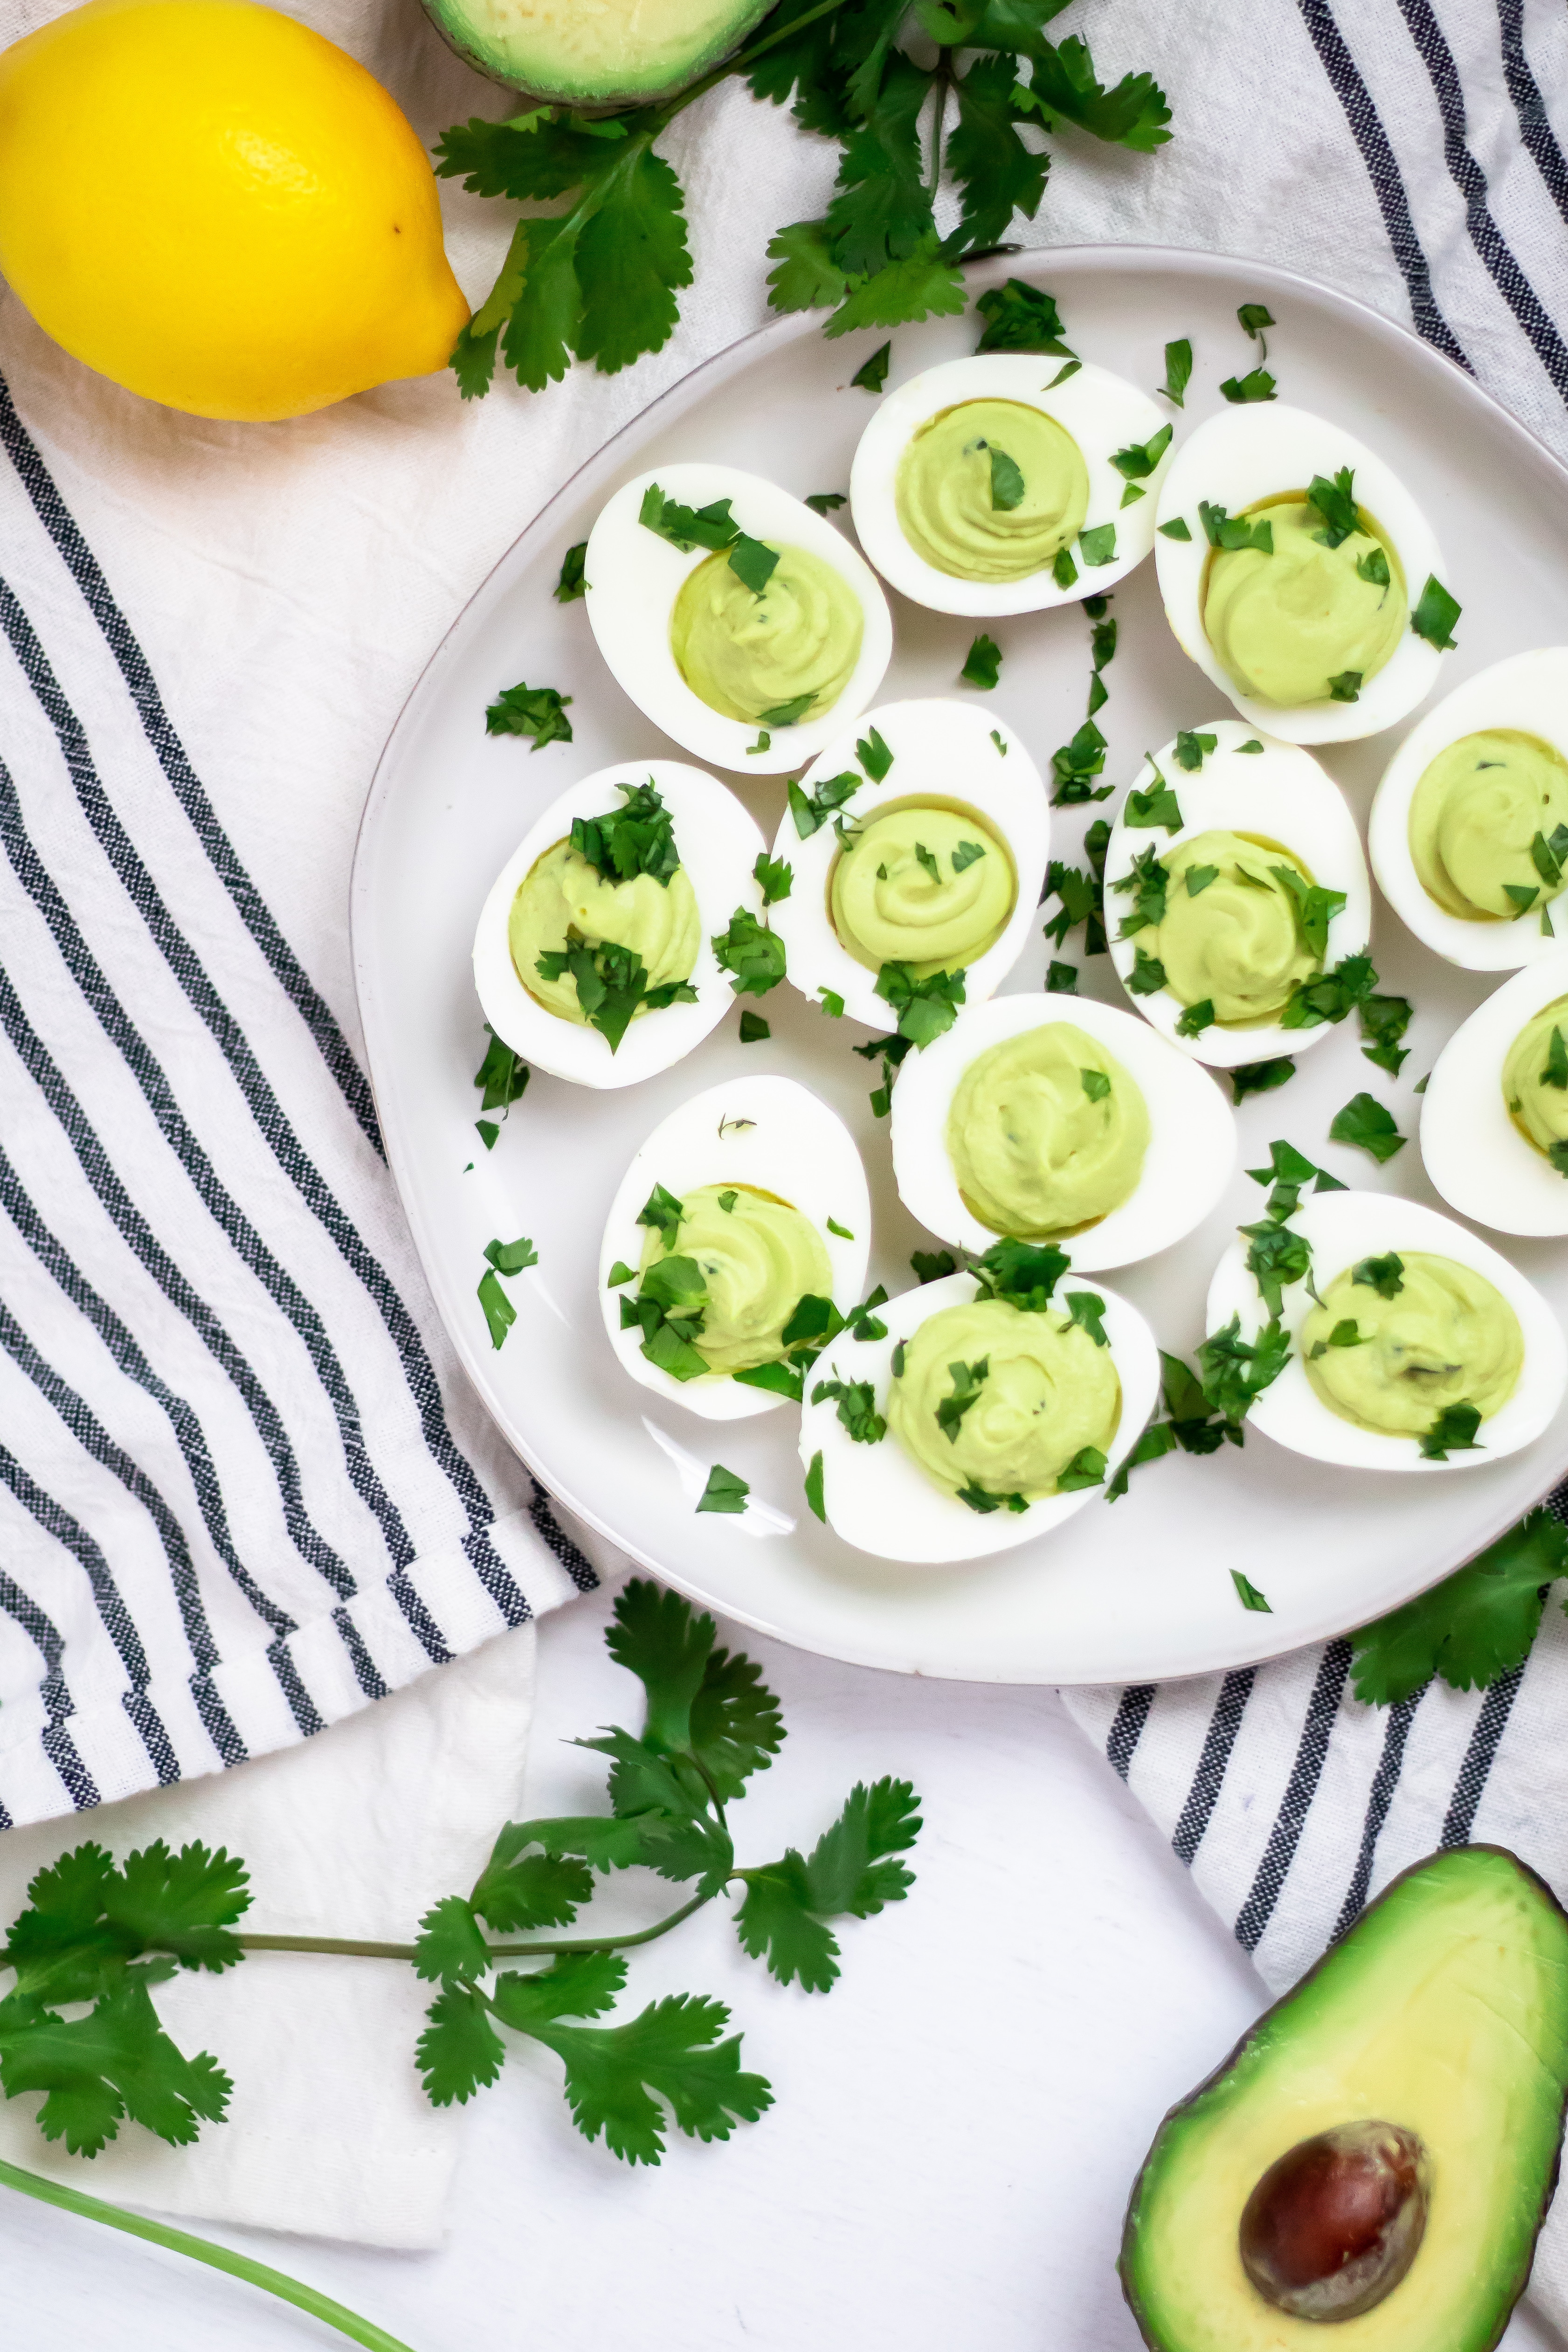 Cream ceramic plate with avocado deviled eggs garnished with cilantro on a black and cream striped linen towel and lemons, avocado, and cilantro surrounding it.